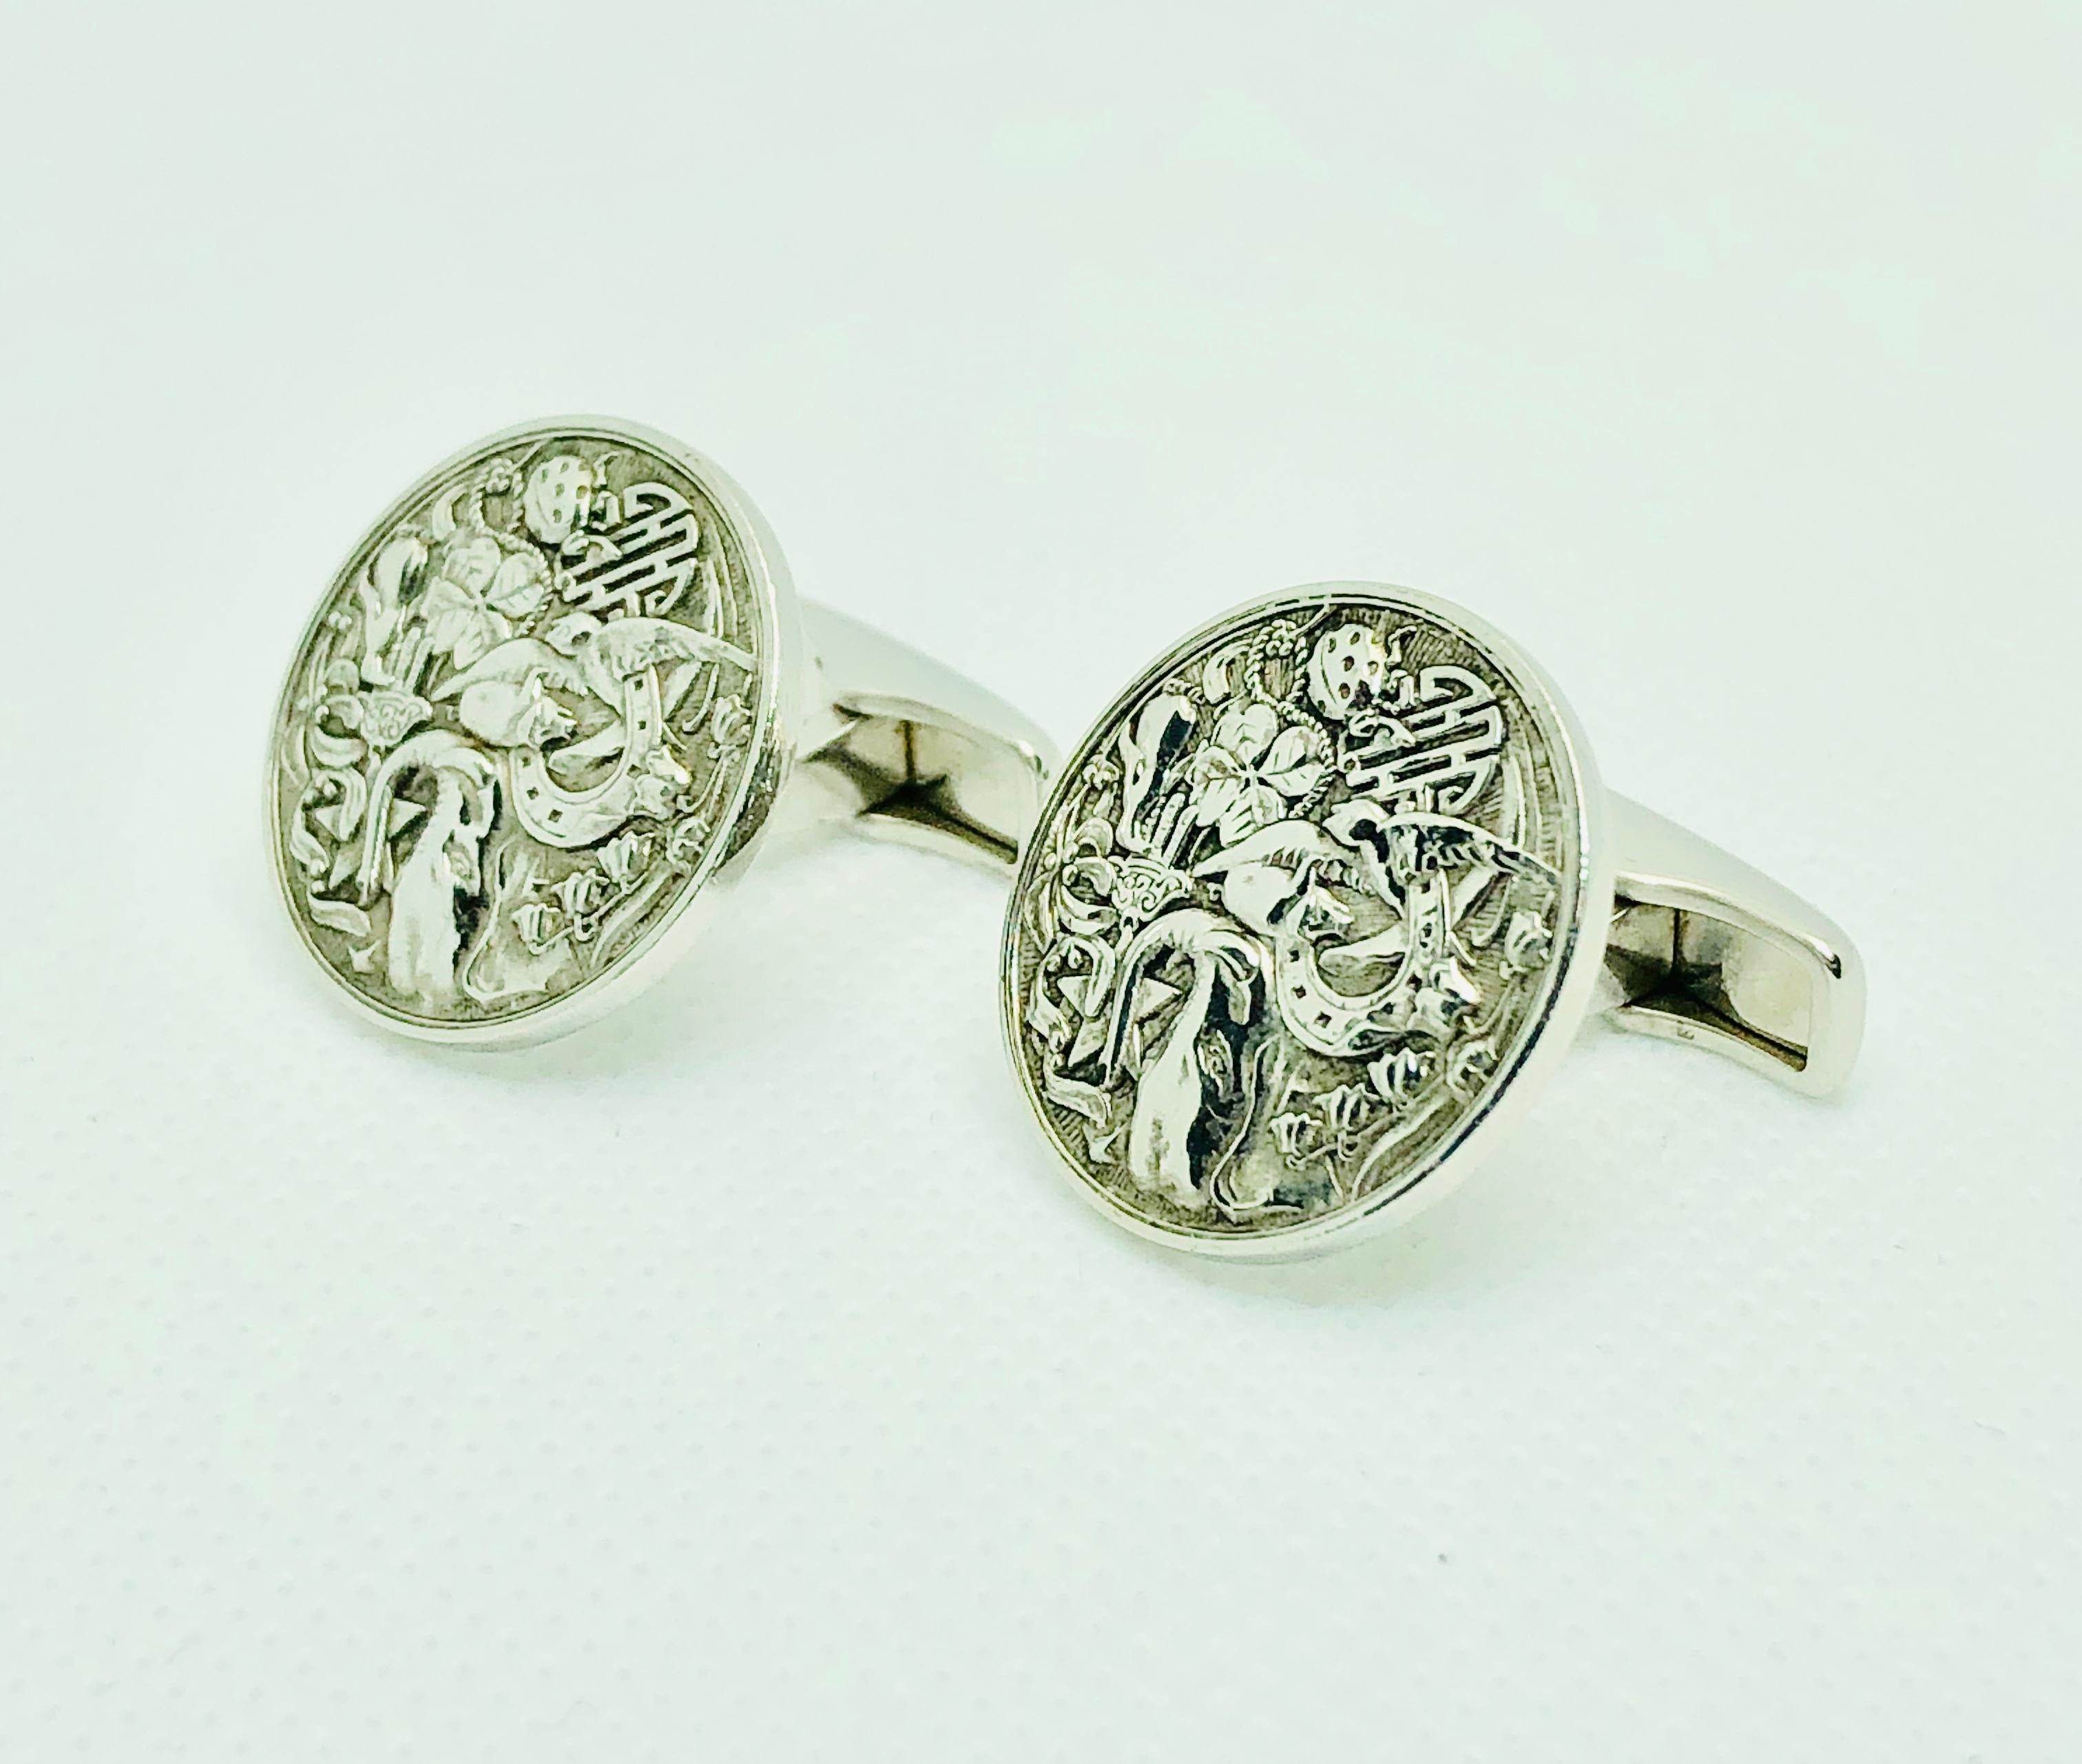 Gorgeous and Very unique Dunhill Cufflinks. They are .75 inches in diameter. Made in sterling silver they feature a montage of numerous animals (elephant head, bird, ladybug, pig and penguin) as well as a horsehoe, star of David with a hamsa and